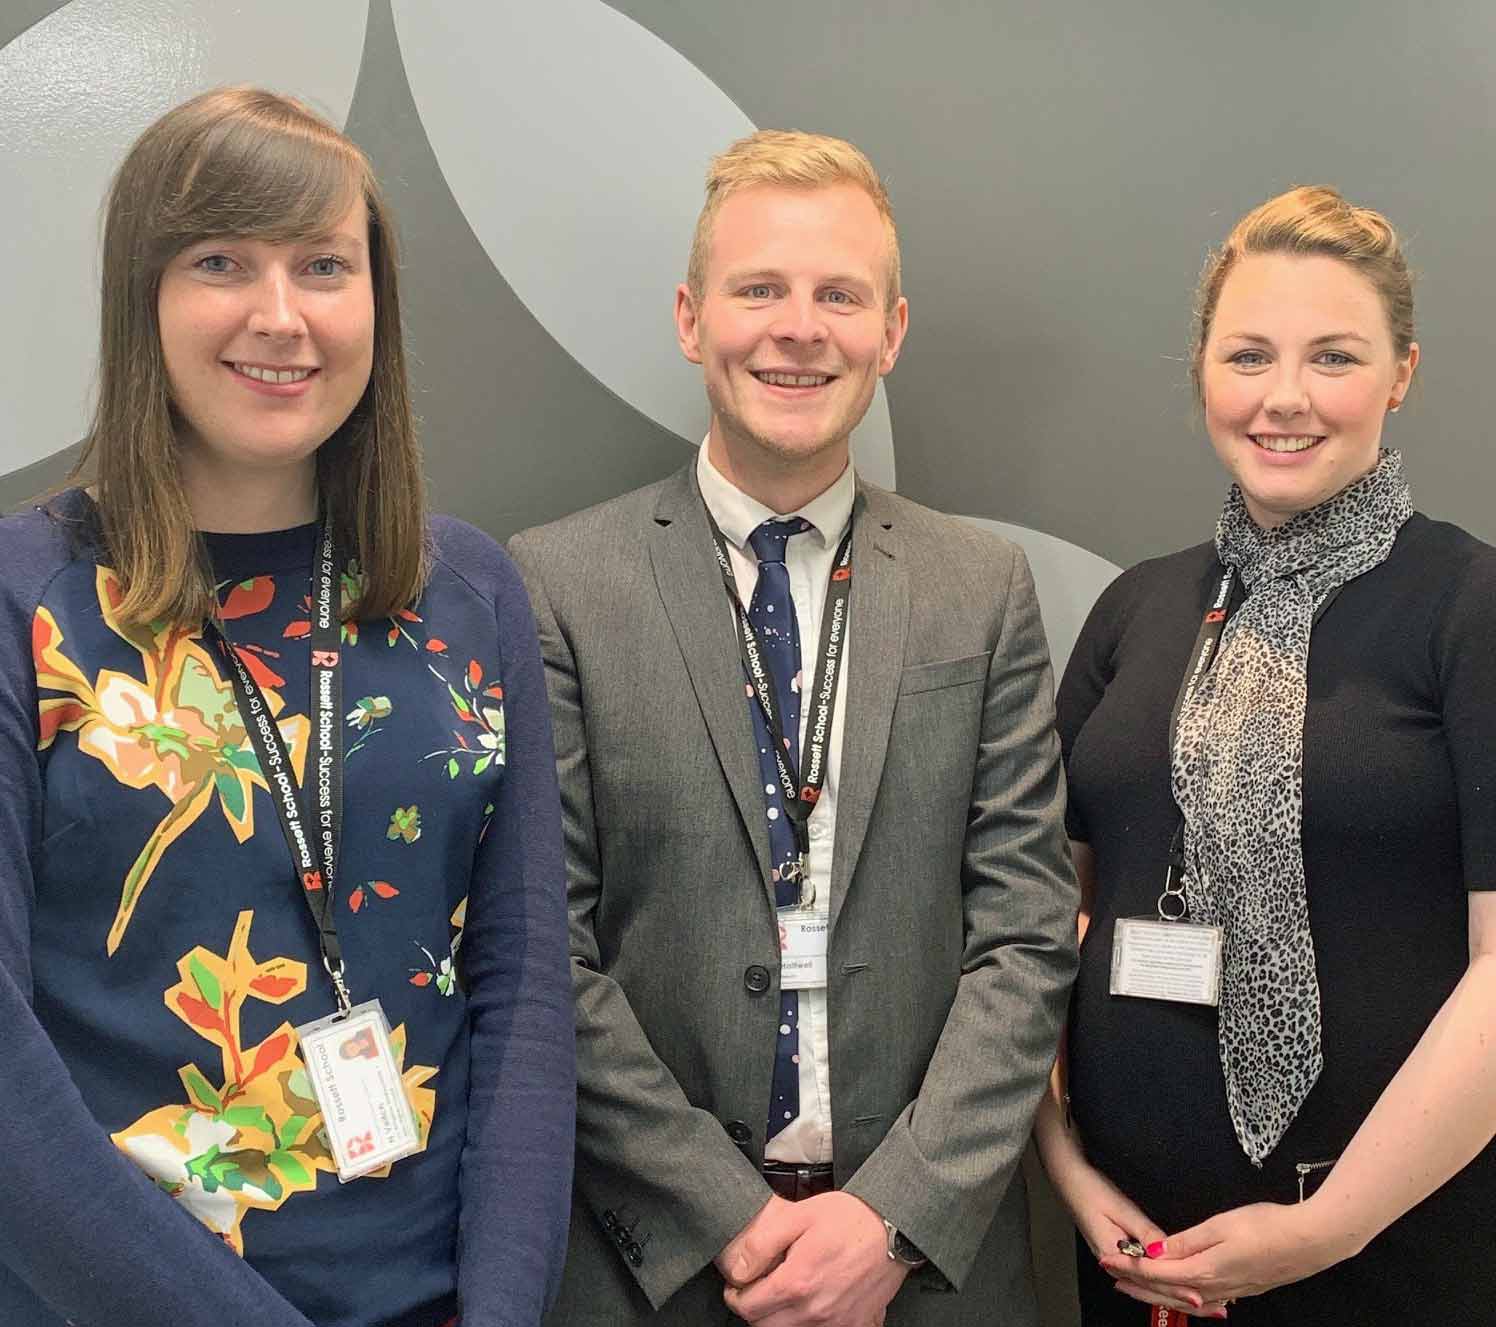 Rossett School teachers Nicole Veitch, Claire Reed and Christian Bruce-Halliwell, pictured from left, are among the first in the UK to gain national Chartered Teacher status